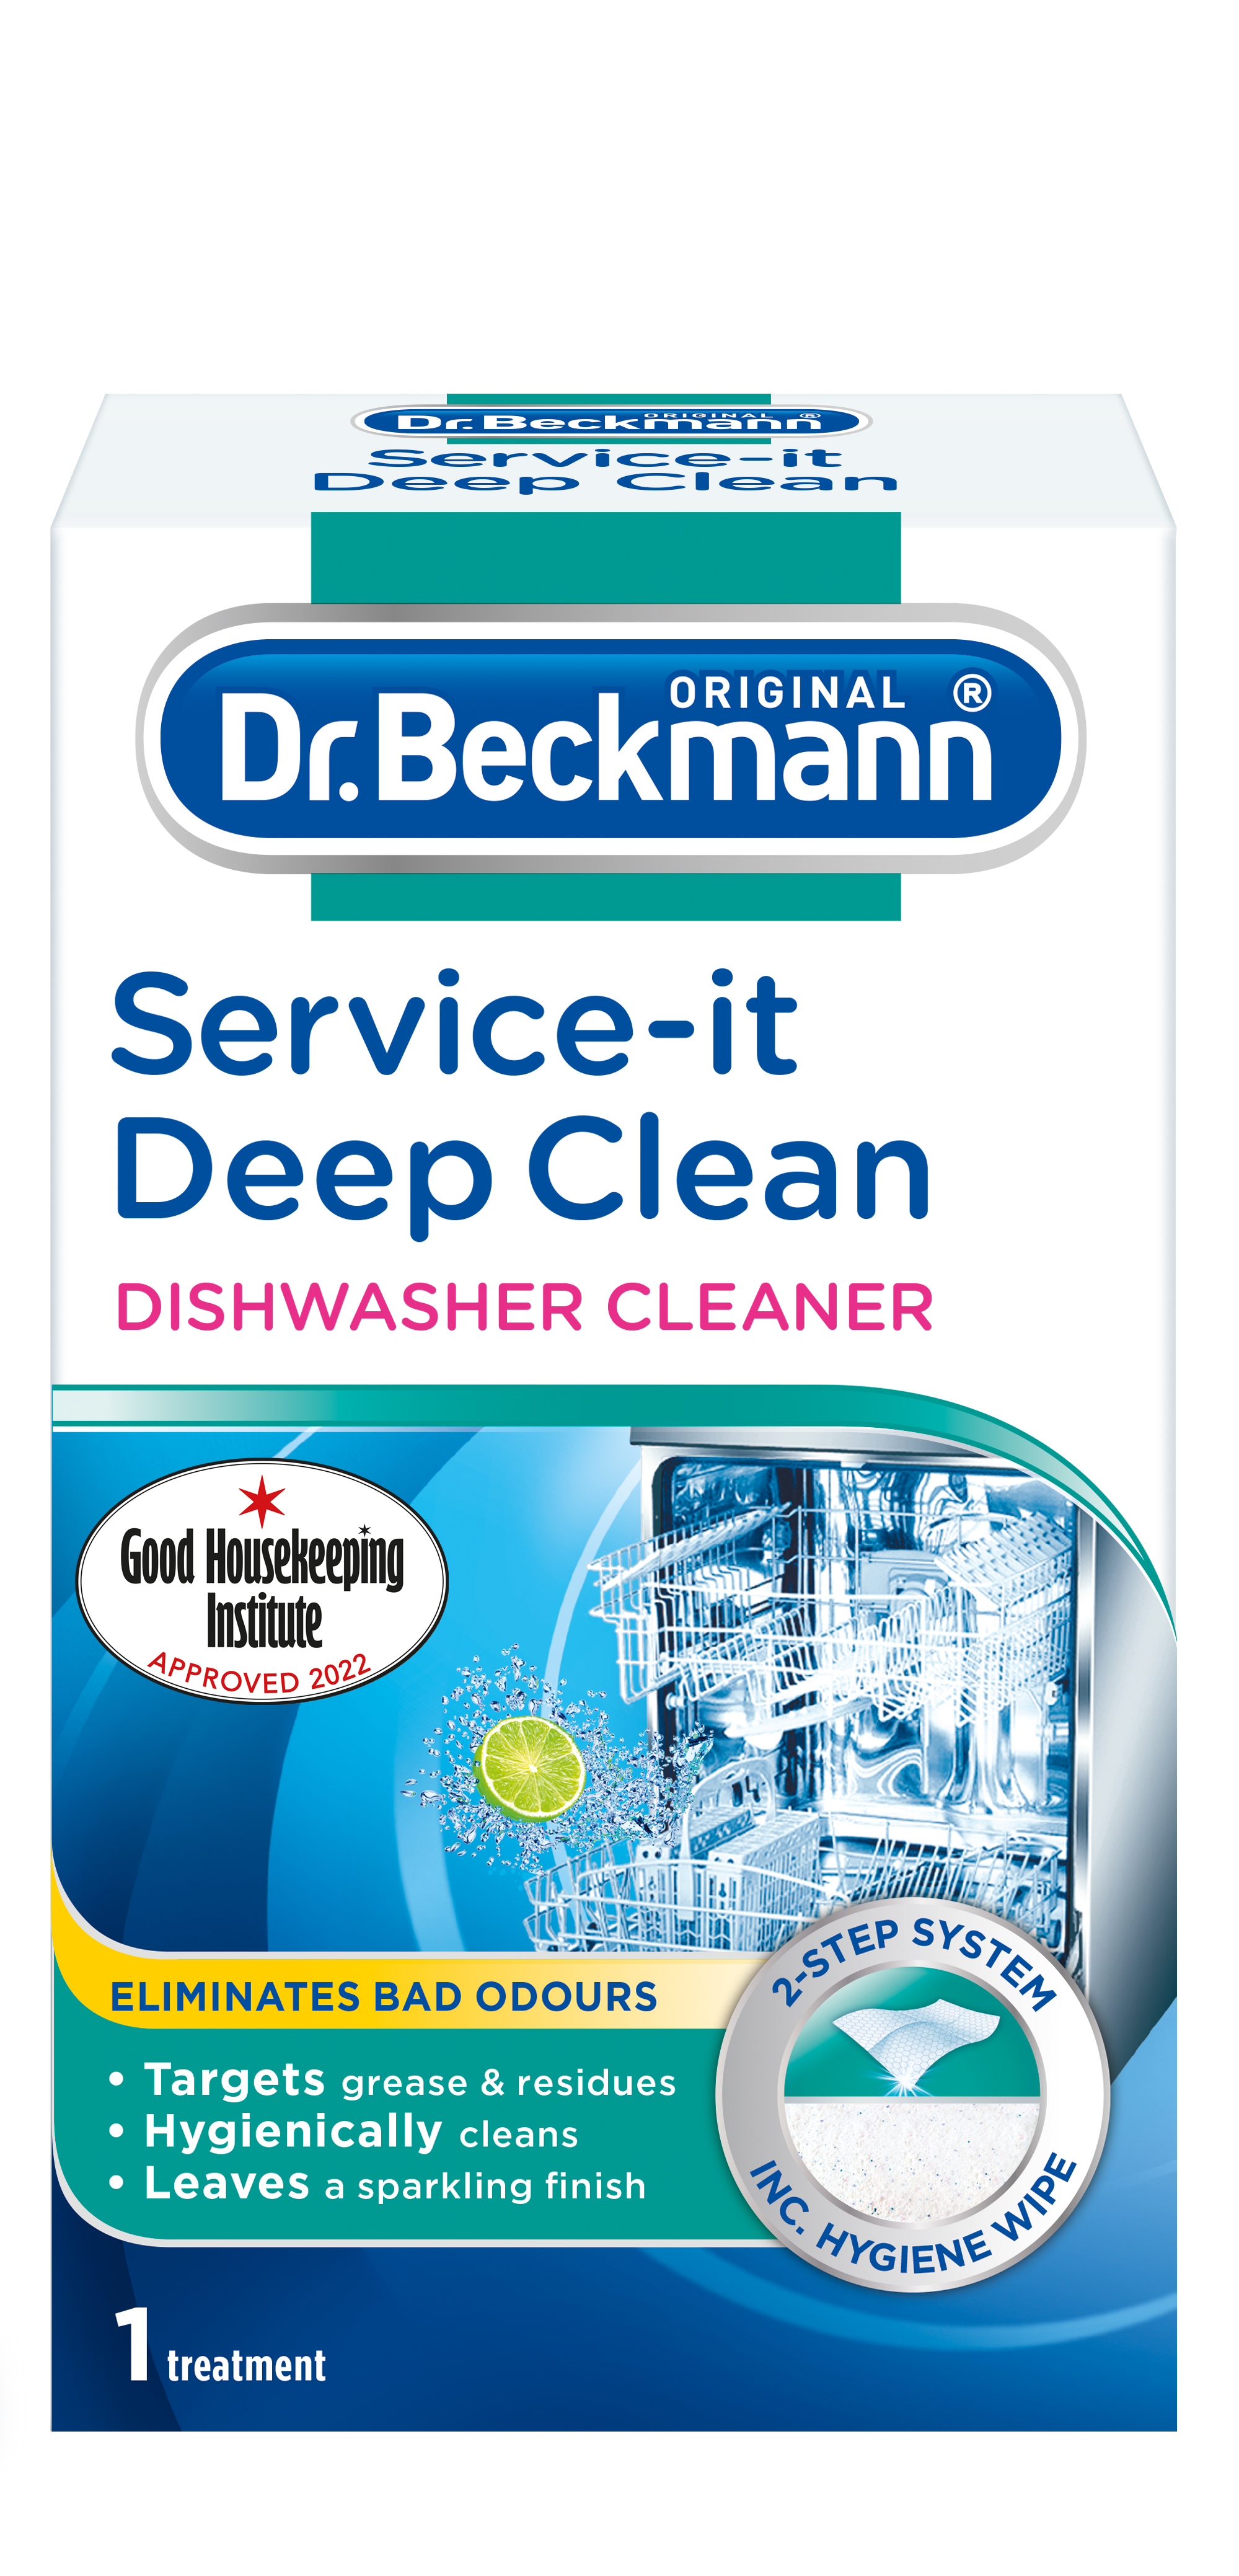 Dr. Beckmann - Cleaning and Laundry Experts